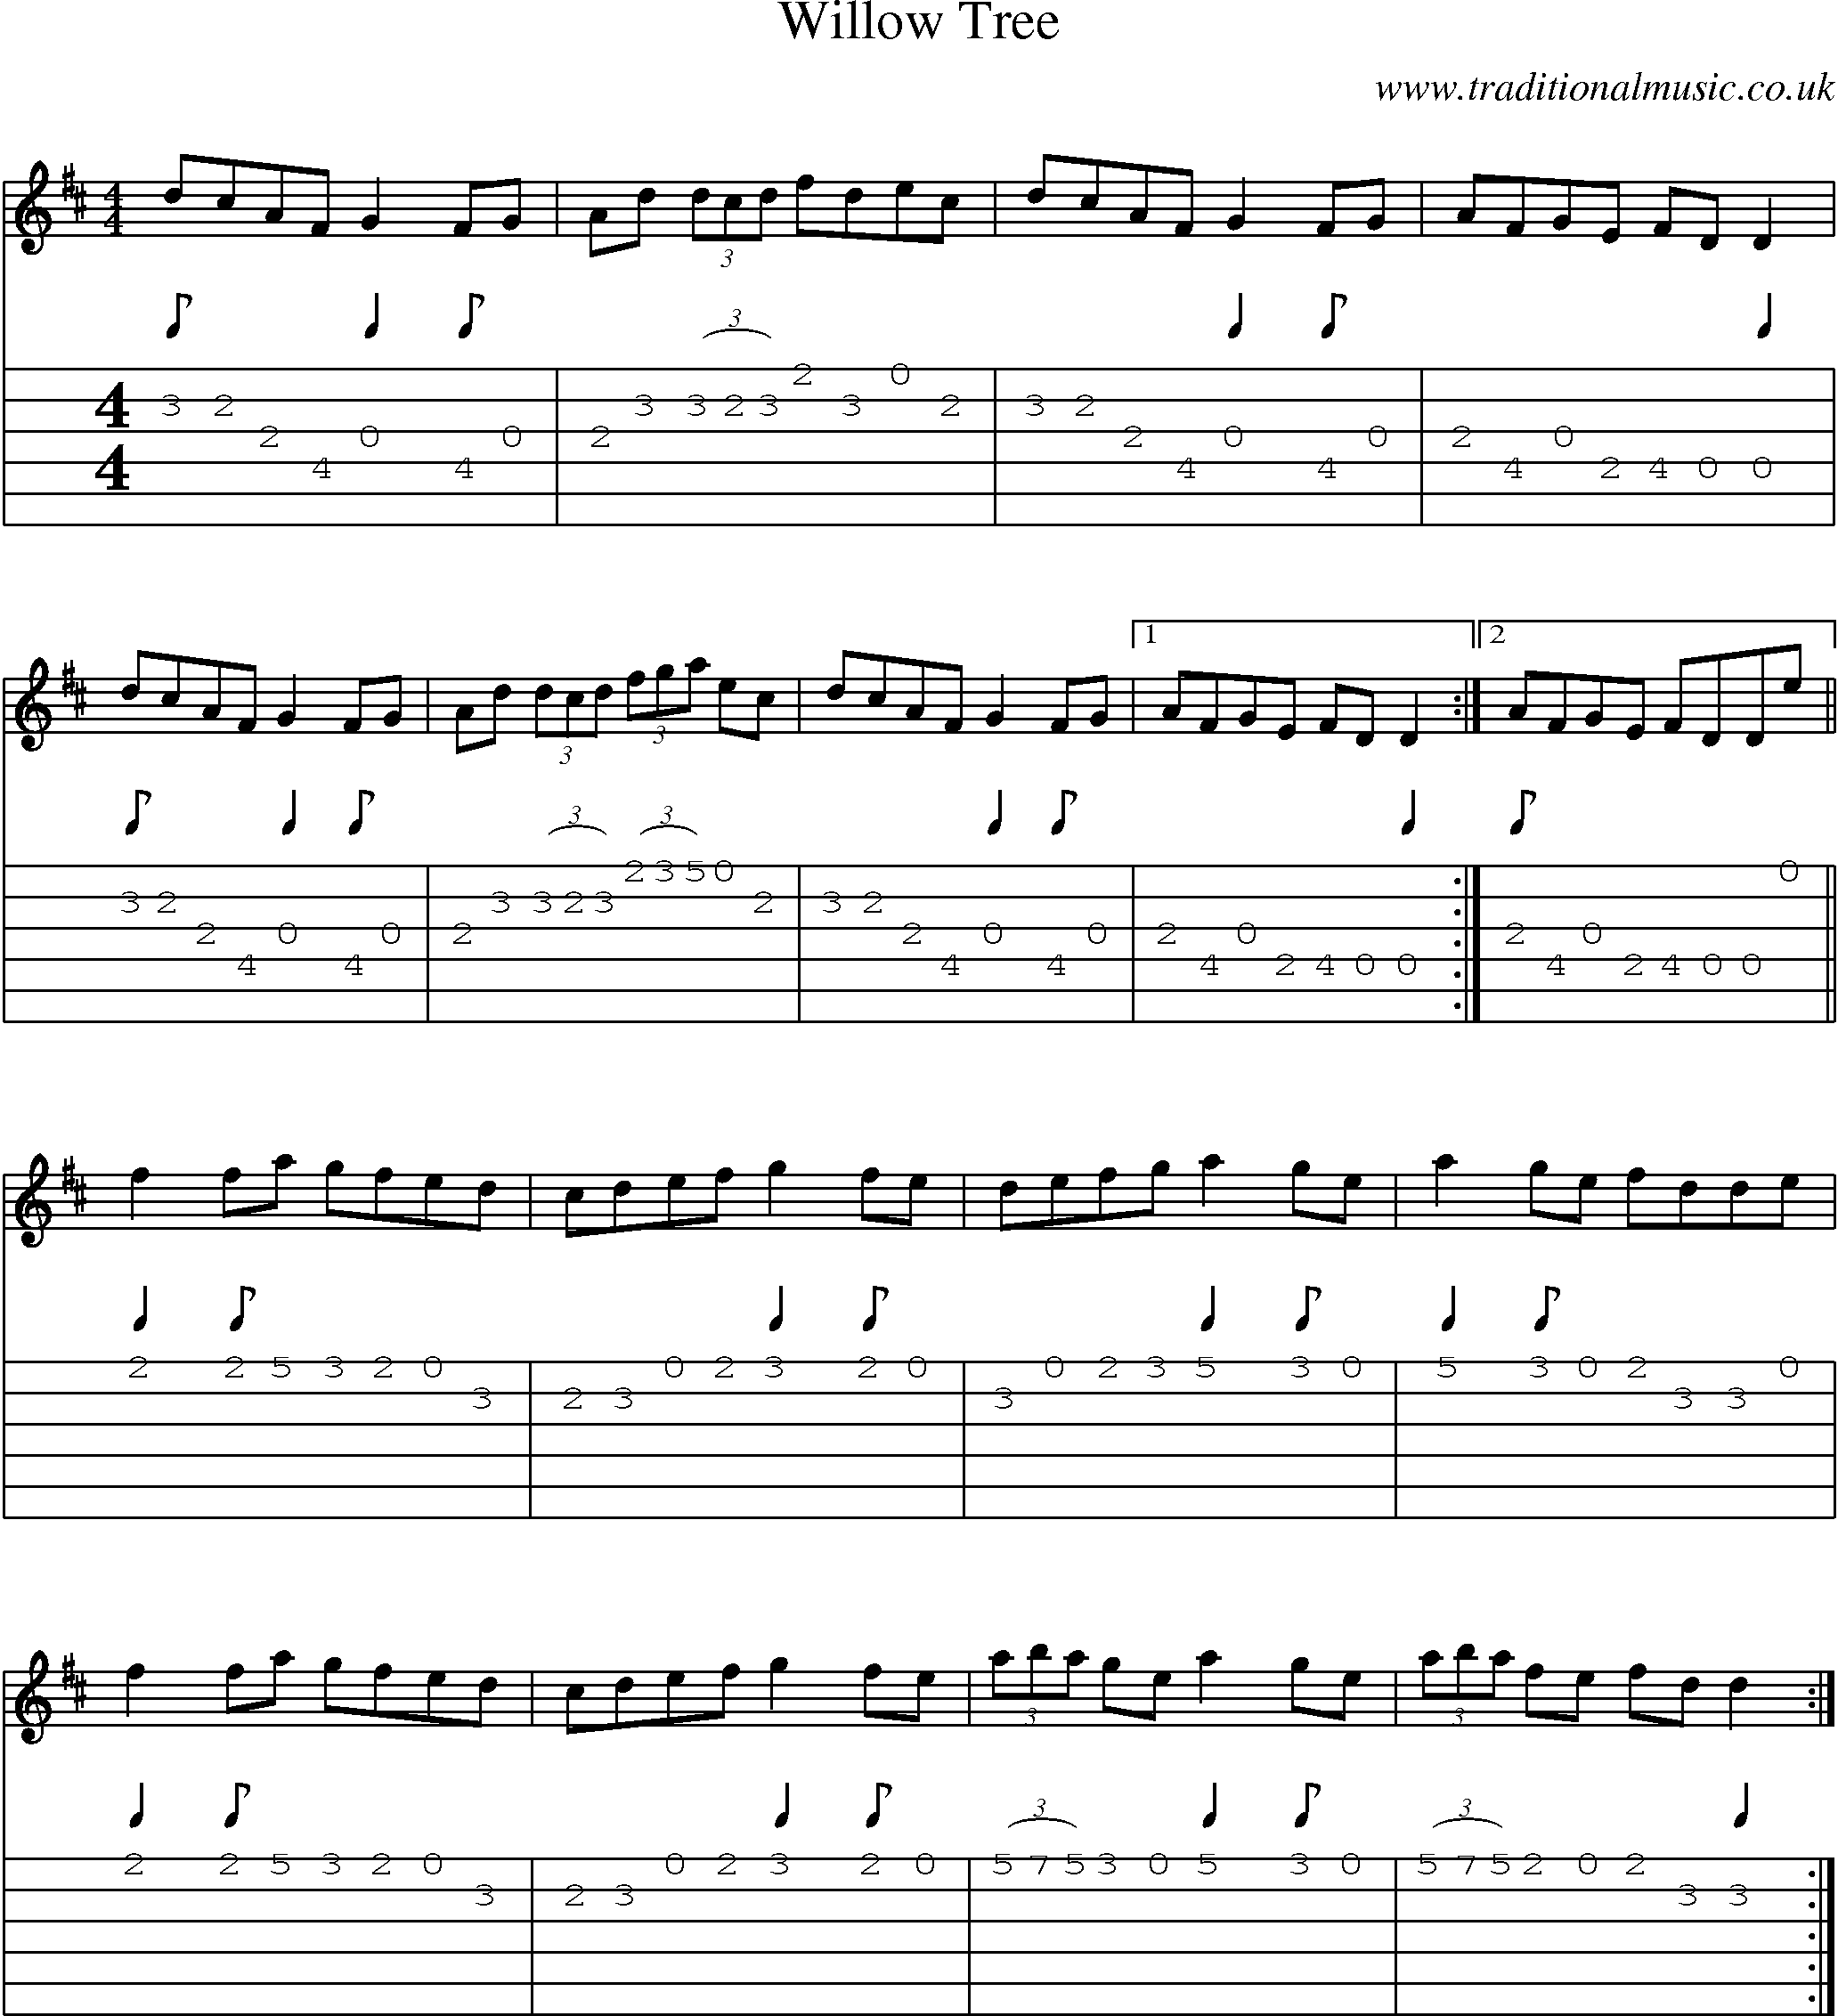 Music Score and Guitar Tabs for Willow Tree